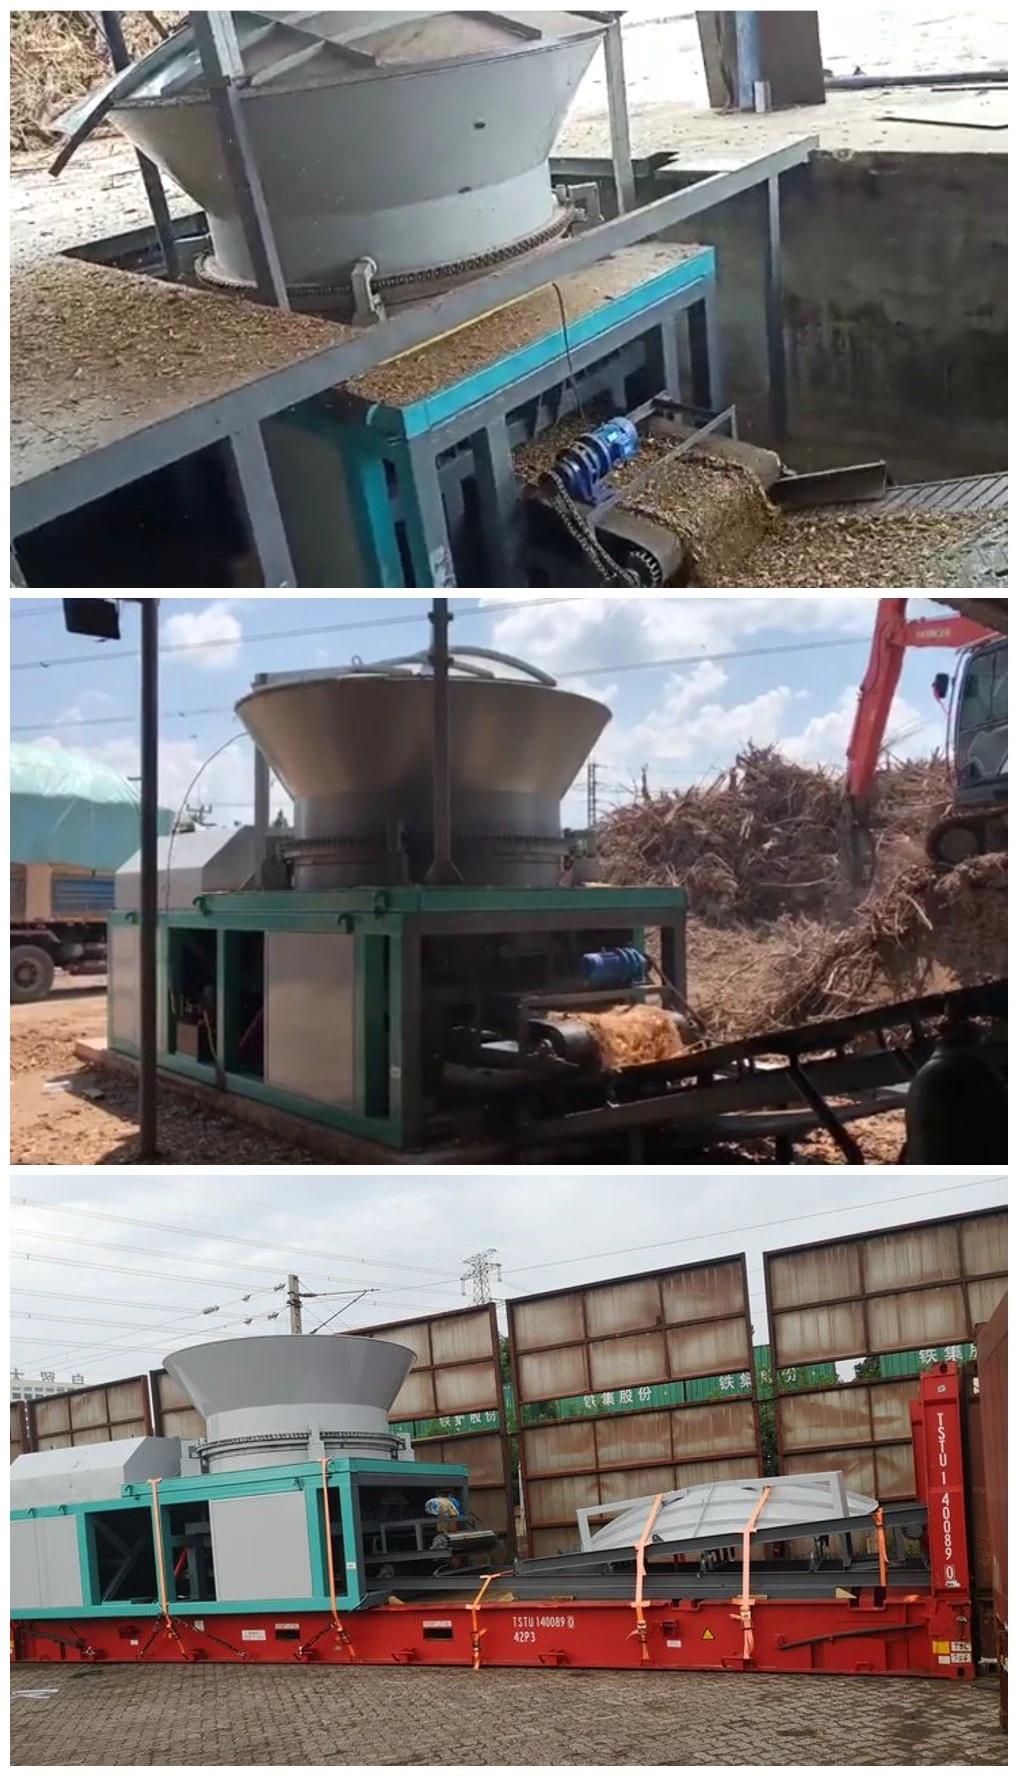 Good Quality Different Type Wood Crusher Wood Shredder